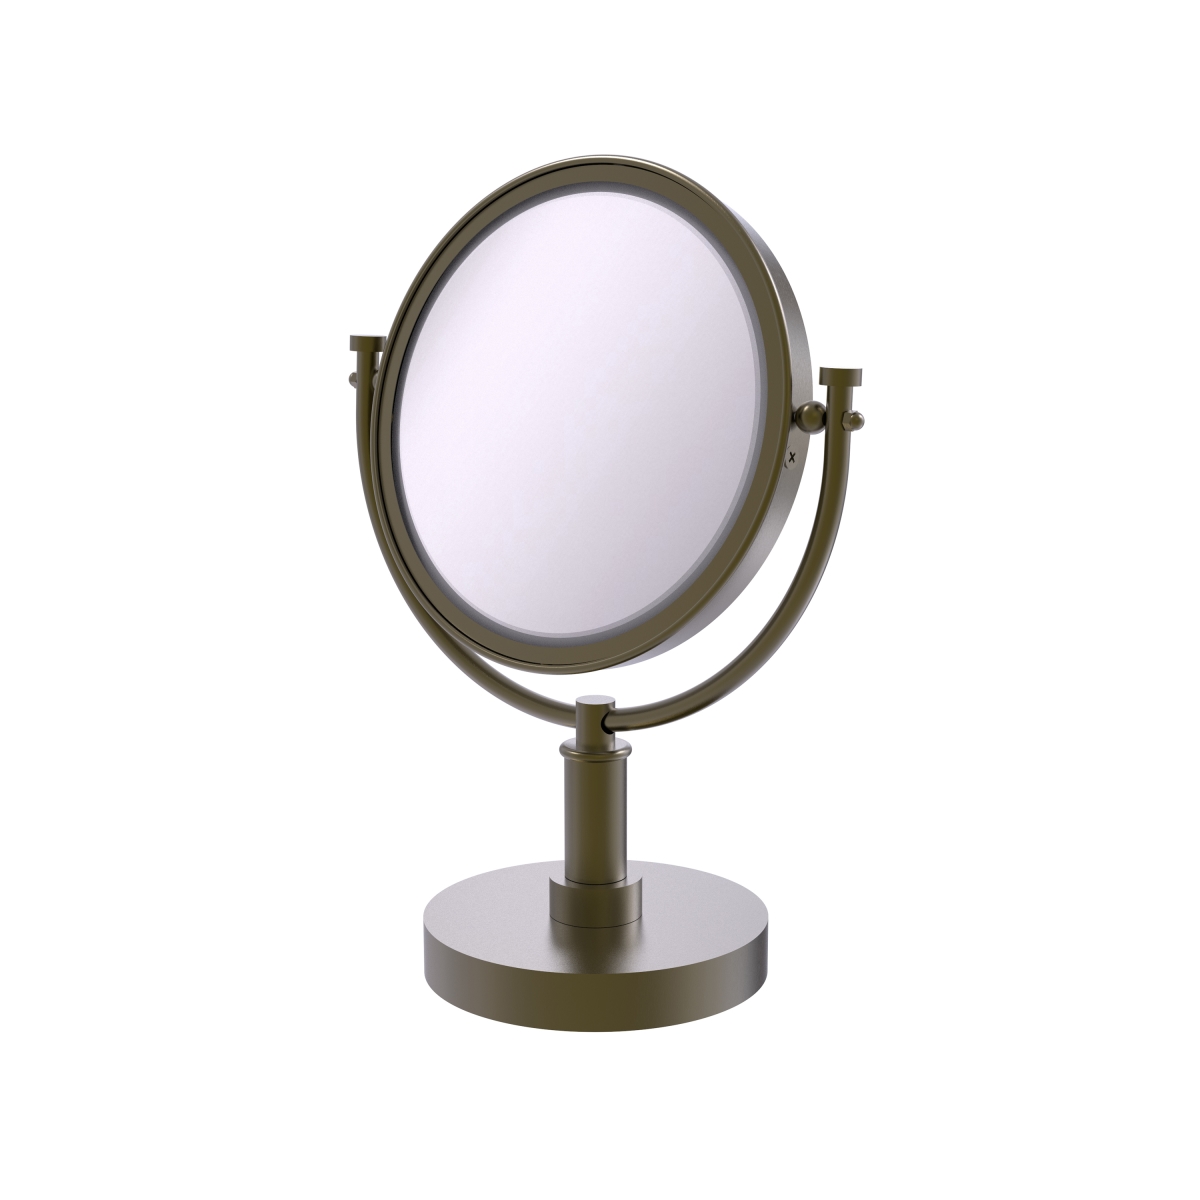 Picture of Allied Brass DM-4-5X-ABR 8 in. Vanity Top Make-Up Mirror 5X Magnification, Antique Brass - 15 x 8 x 8 in.